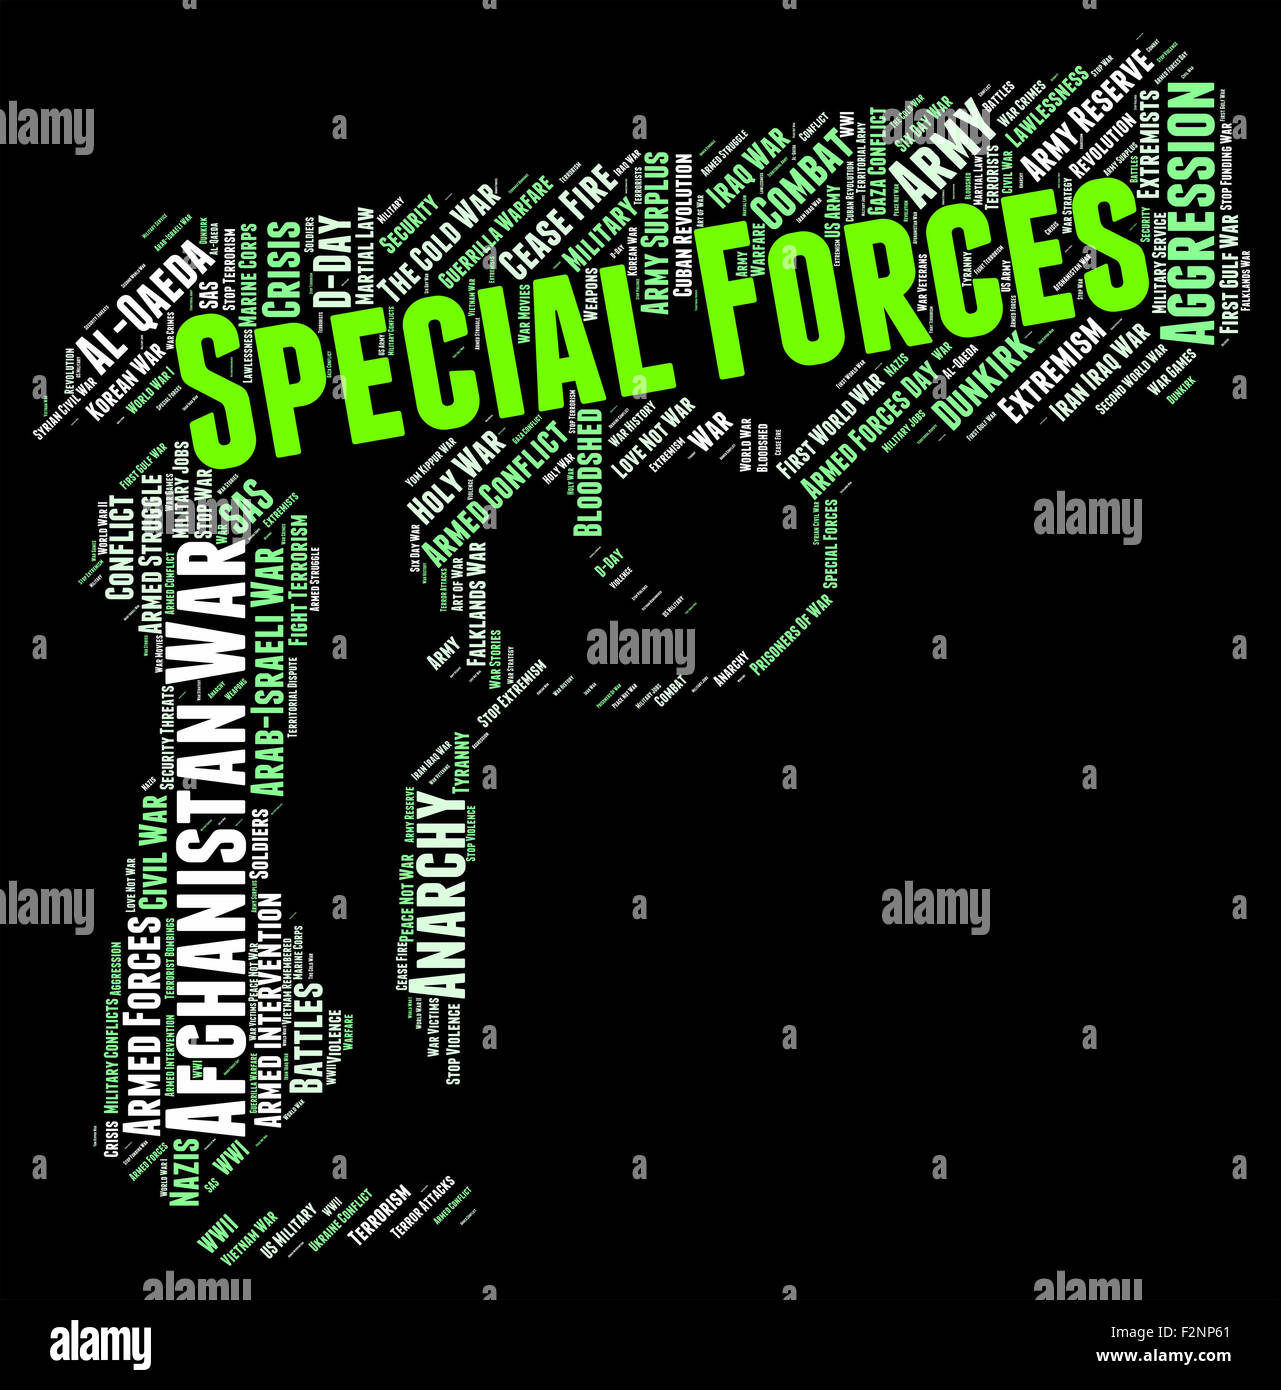 Special Forces Meaning Targets. Manhunting And Wordclouds Stock Photo